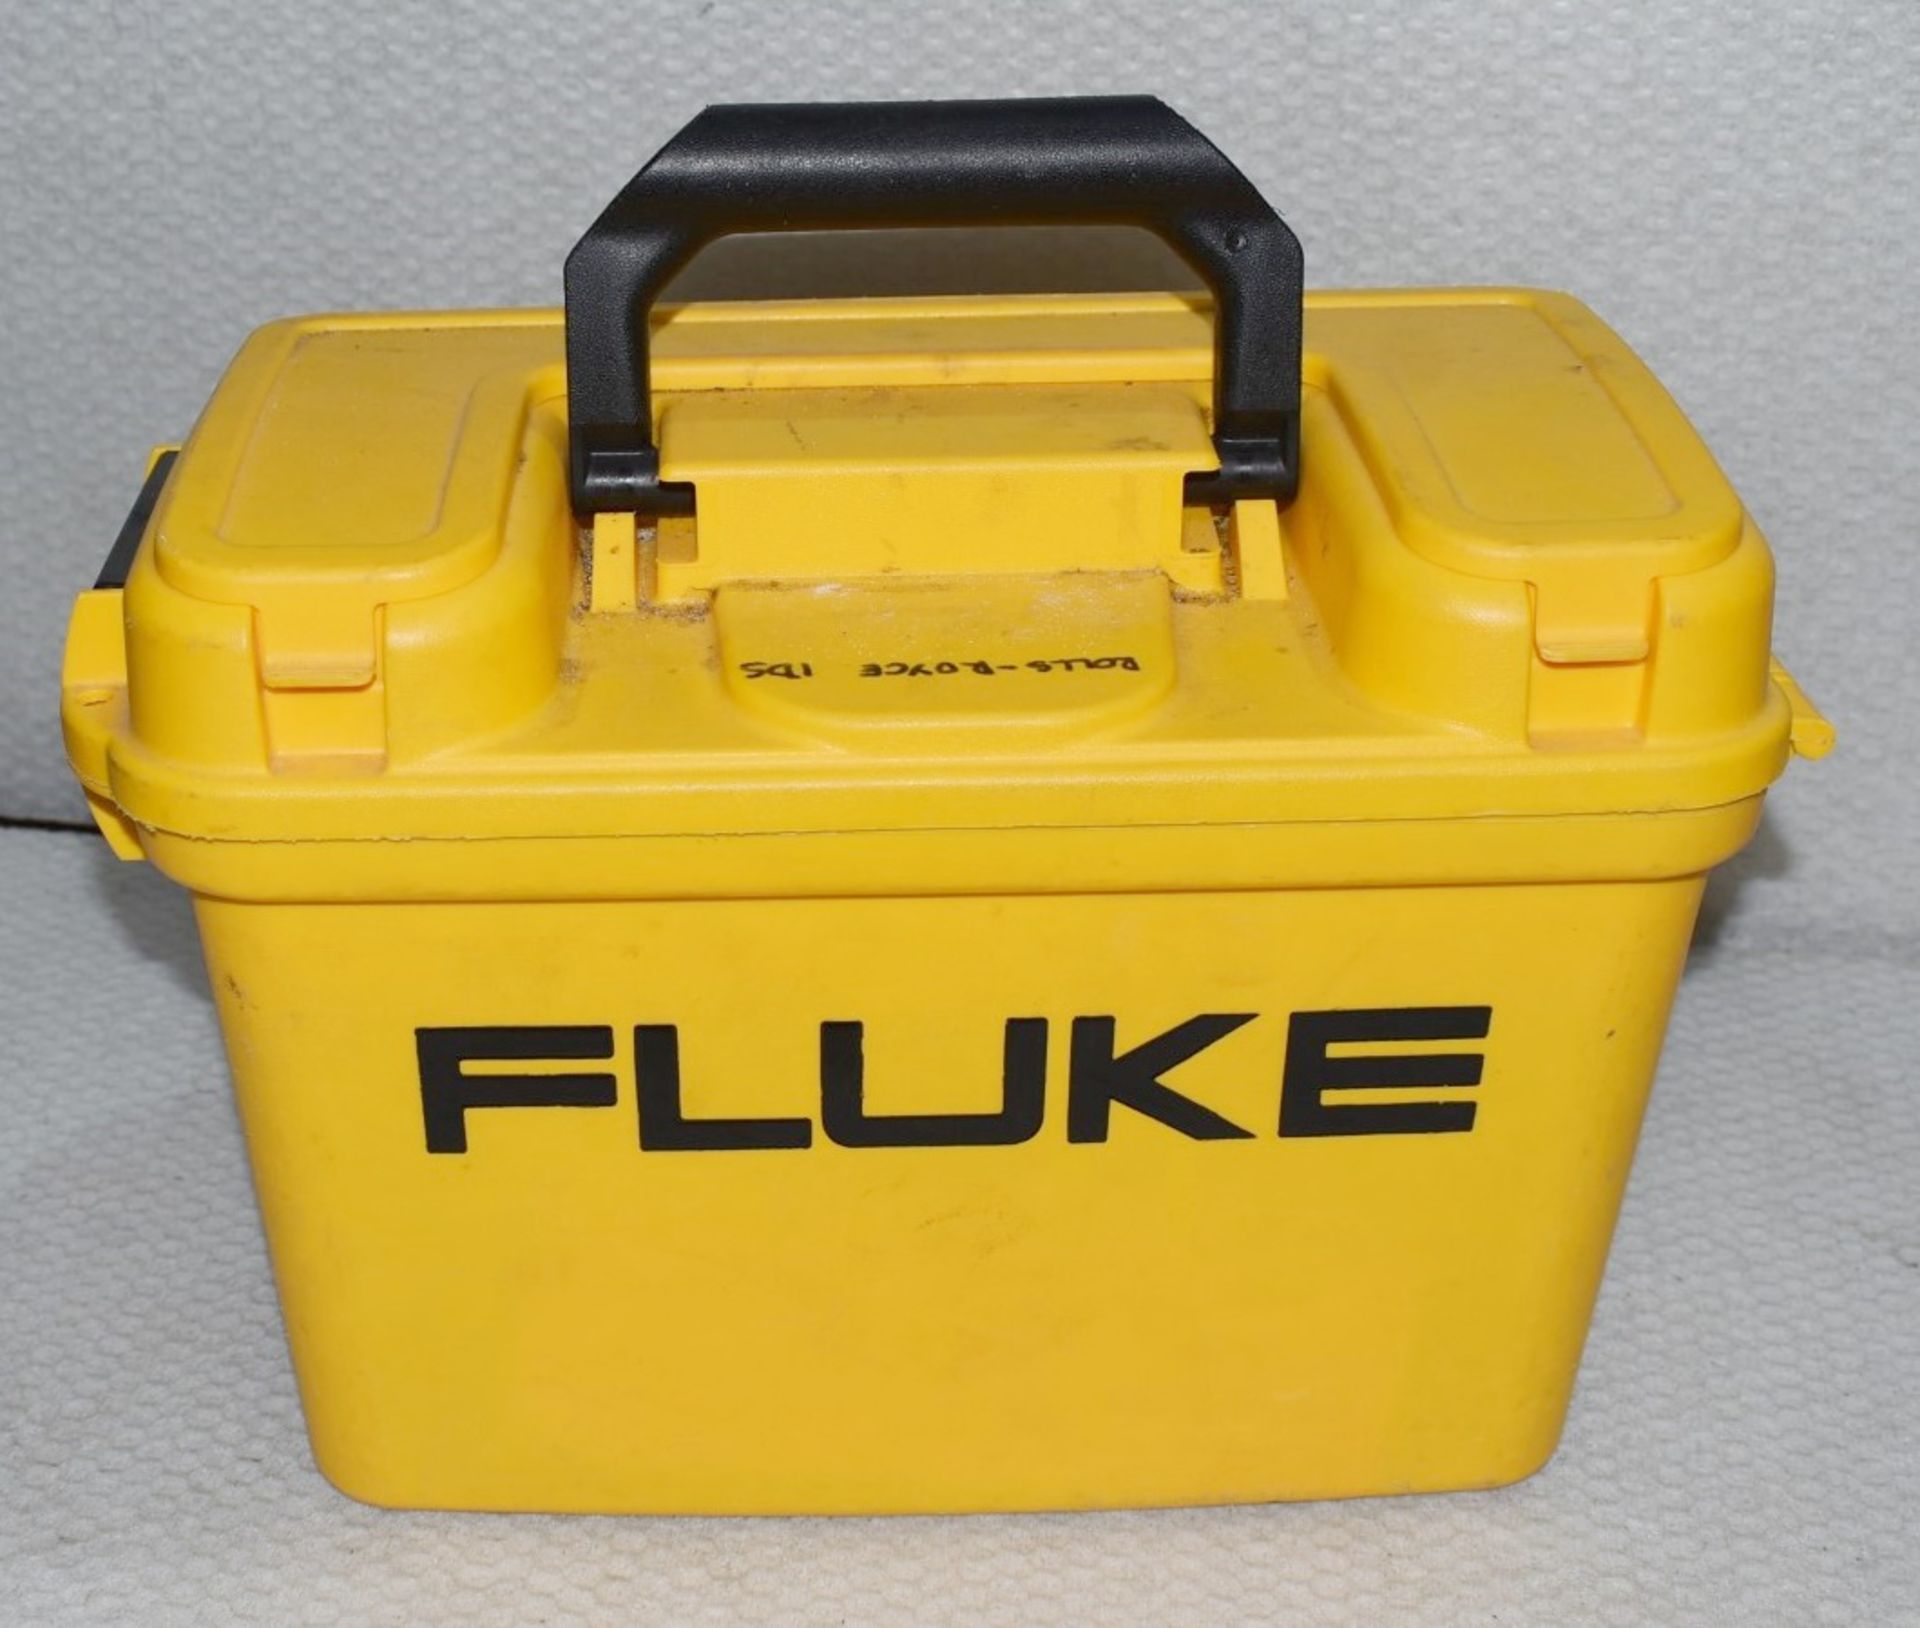 1 x FLUKE 1664 FC Multifunction Tester With Portable Hard Carry Case - Original RRP £959.00 - Ref: - Image 4 of 5